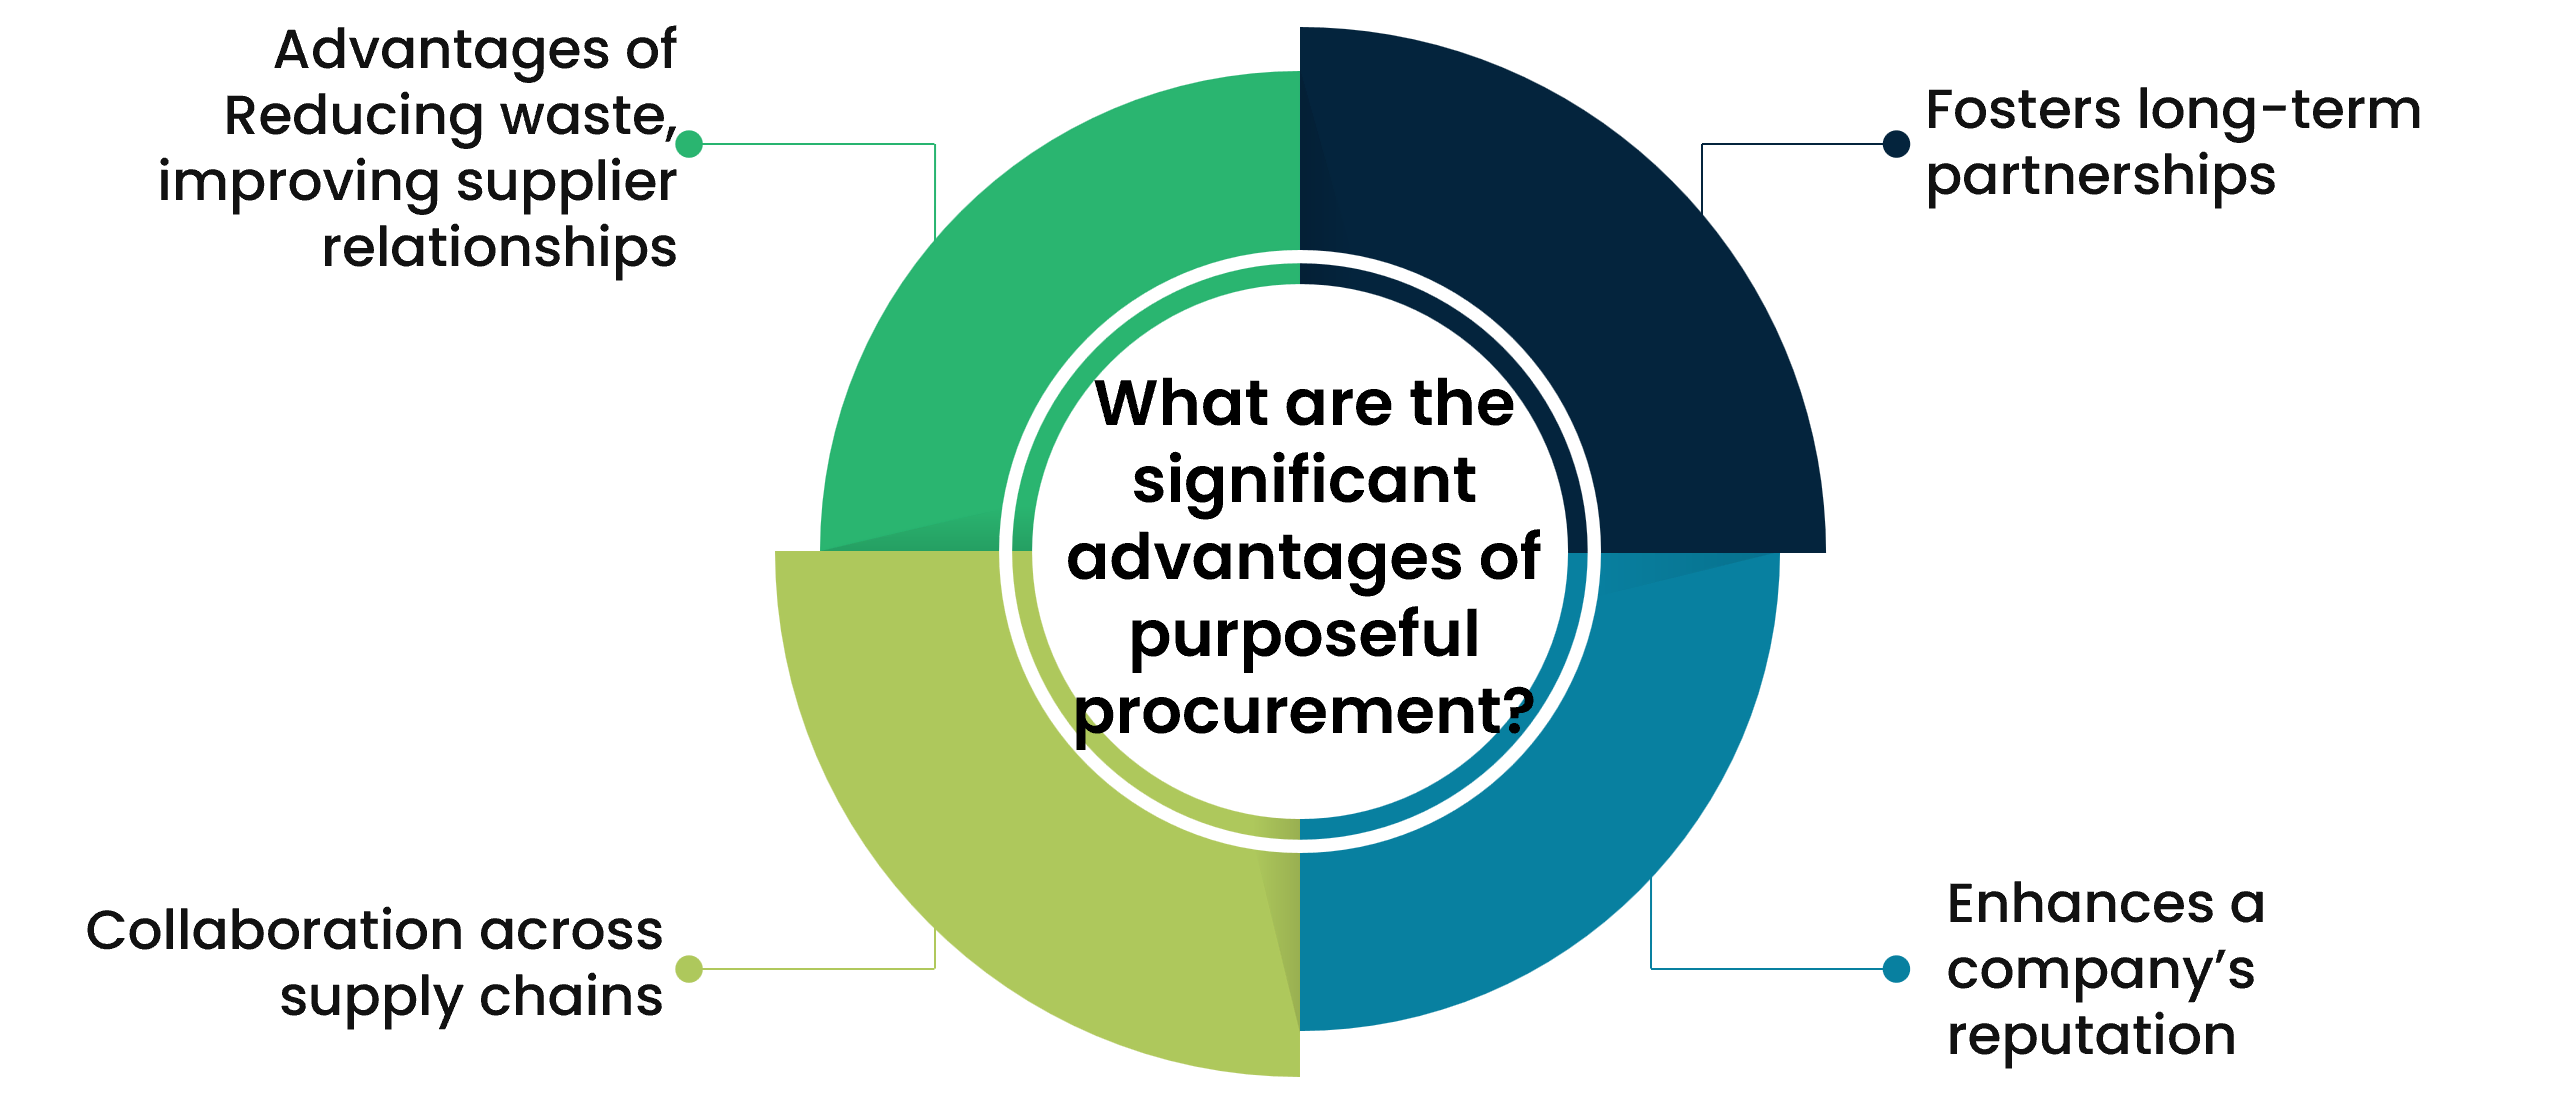 What are the significant advantages of purposeful procurement